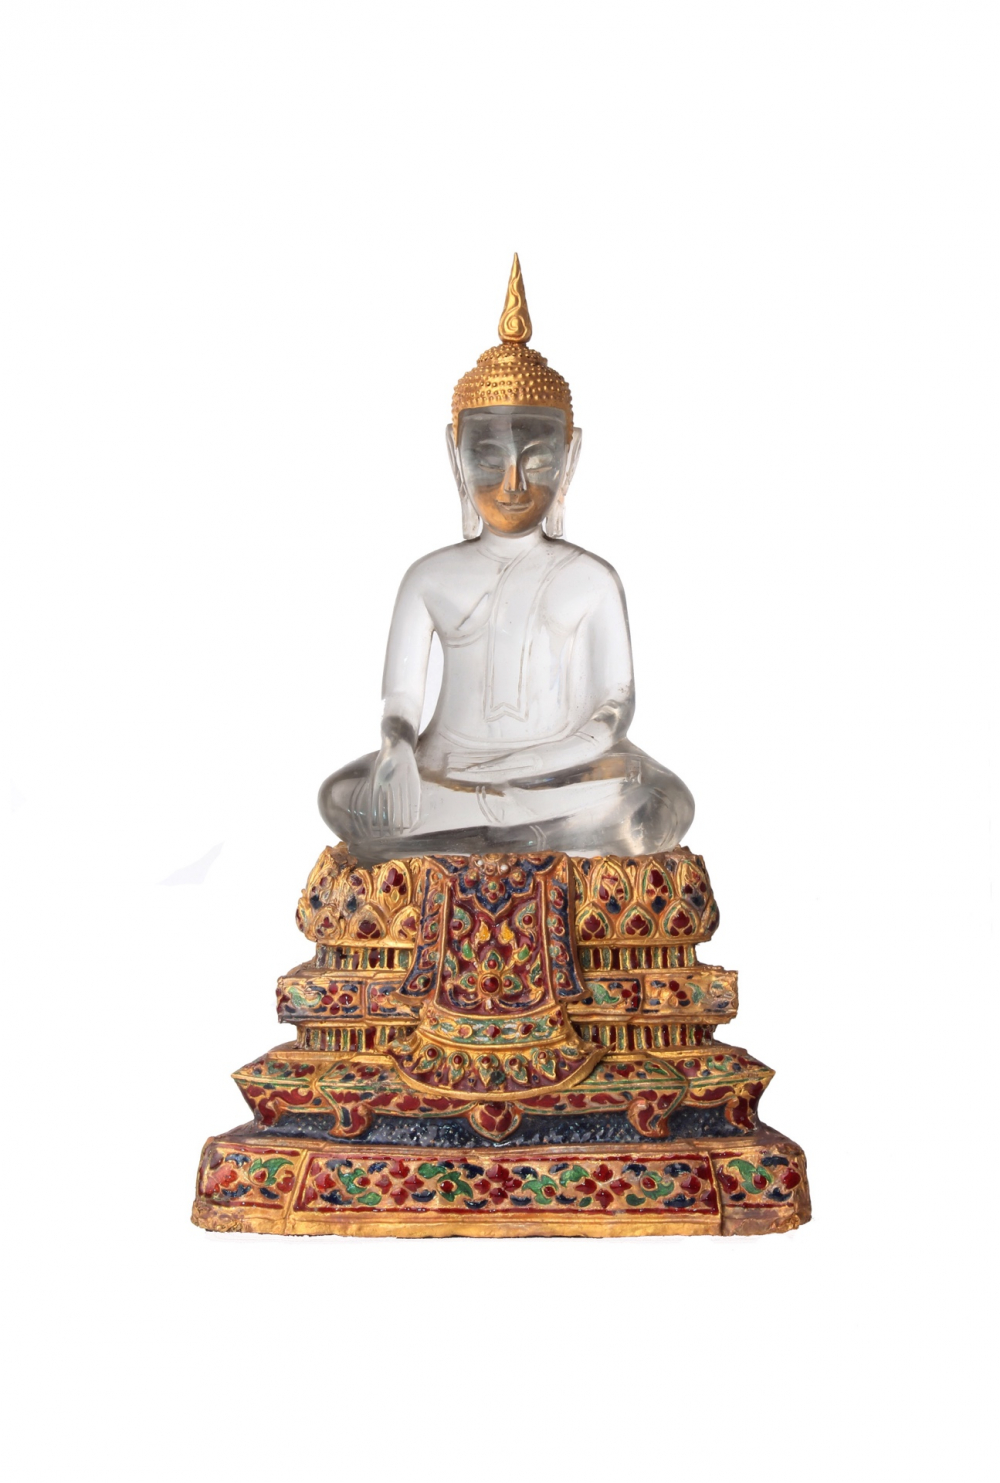 new-year-blessing-planned-for-buddha-artefacts-the-nation-3.jpg